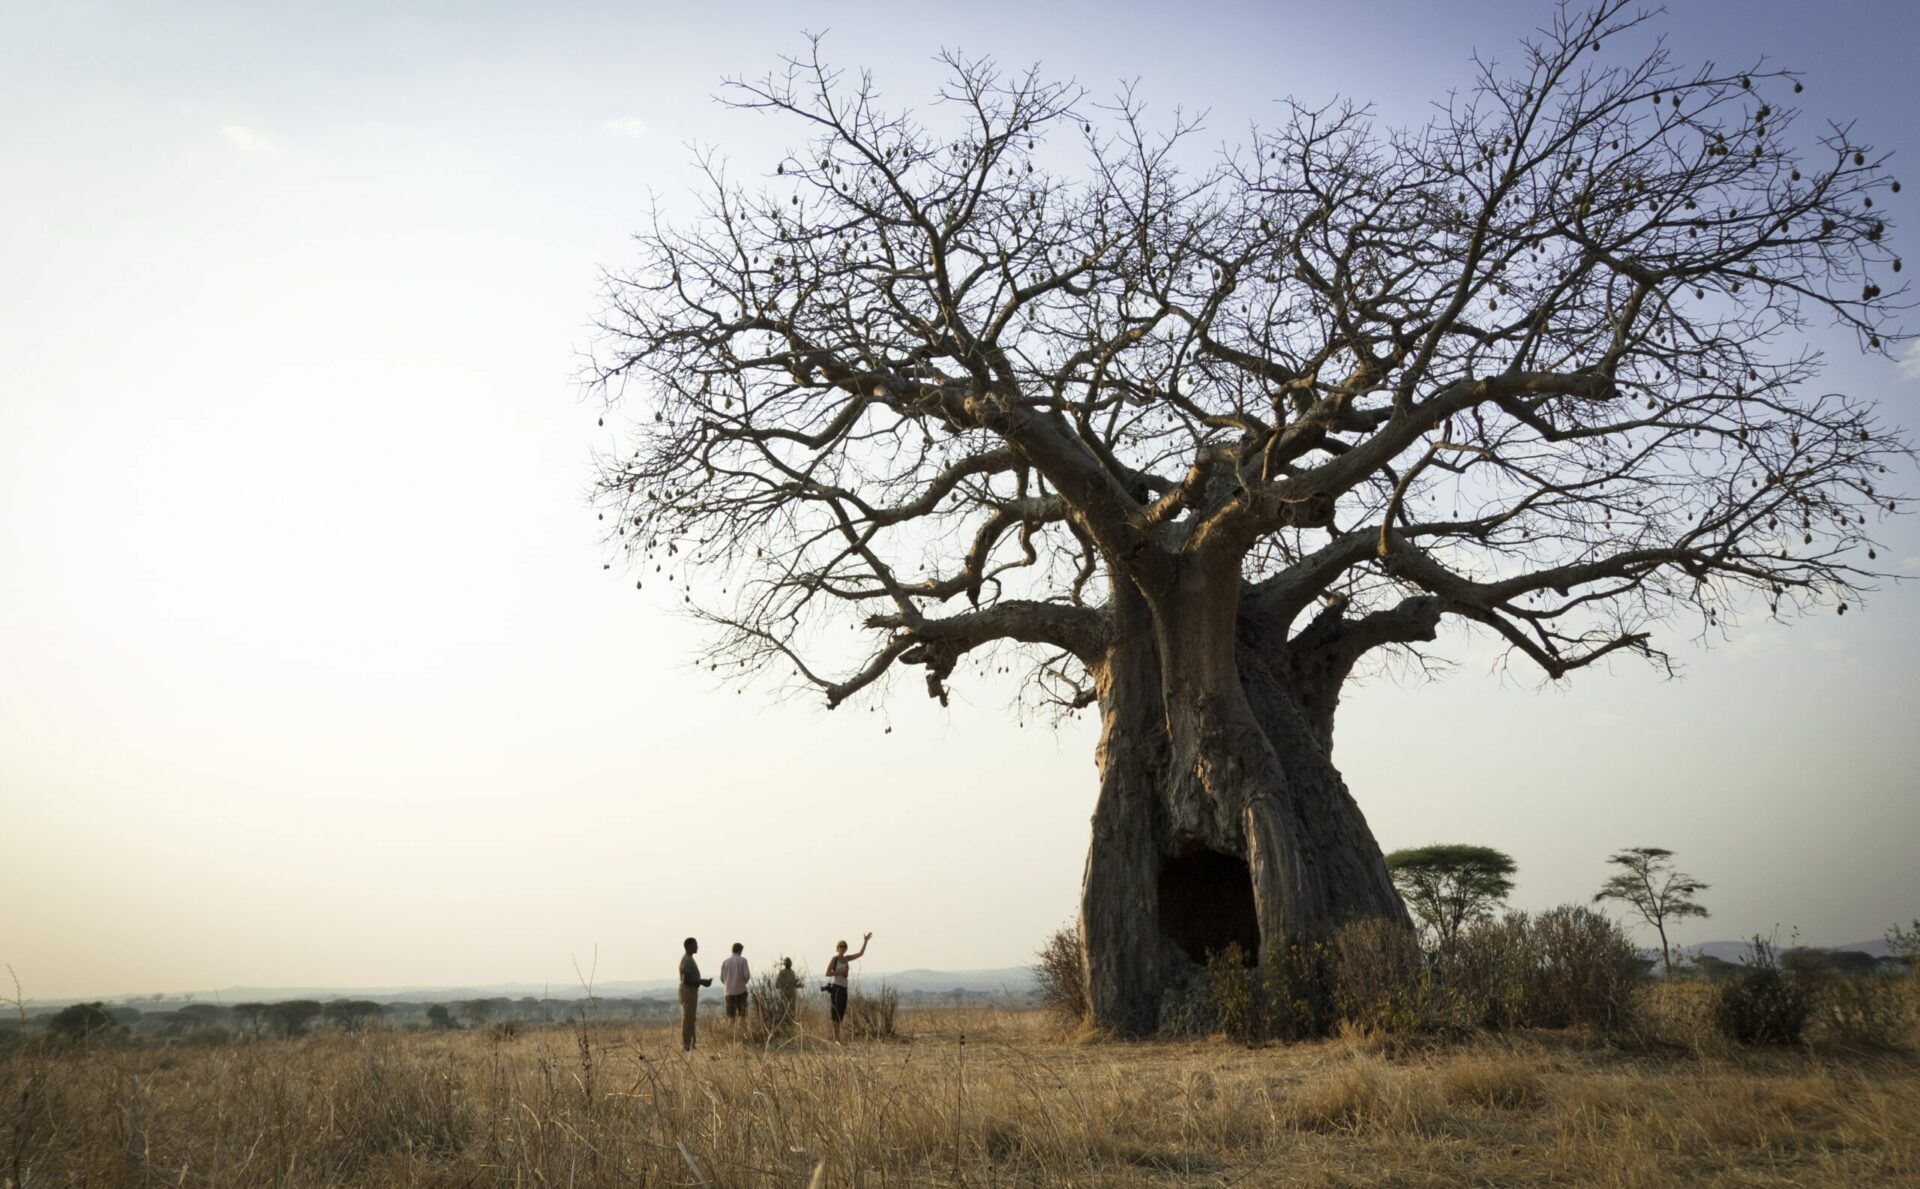 massive baobab tree at Kigelia Ruaha with a small group of people reveling at its size.